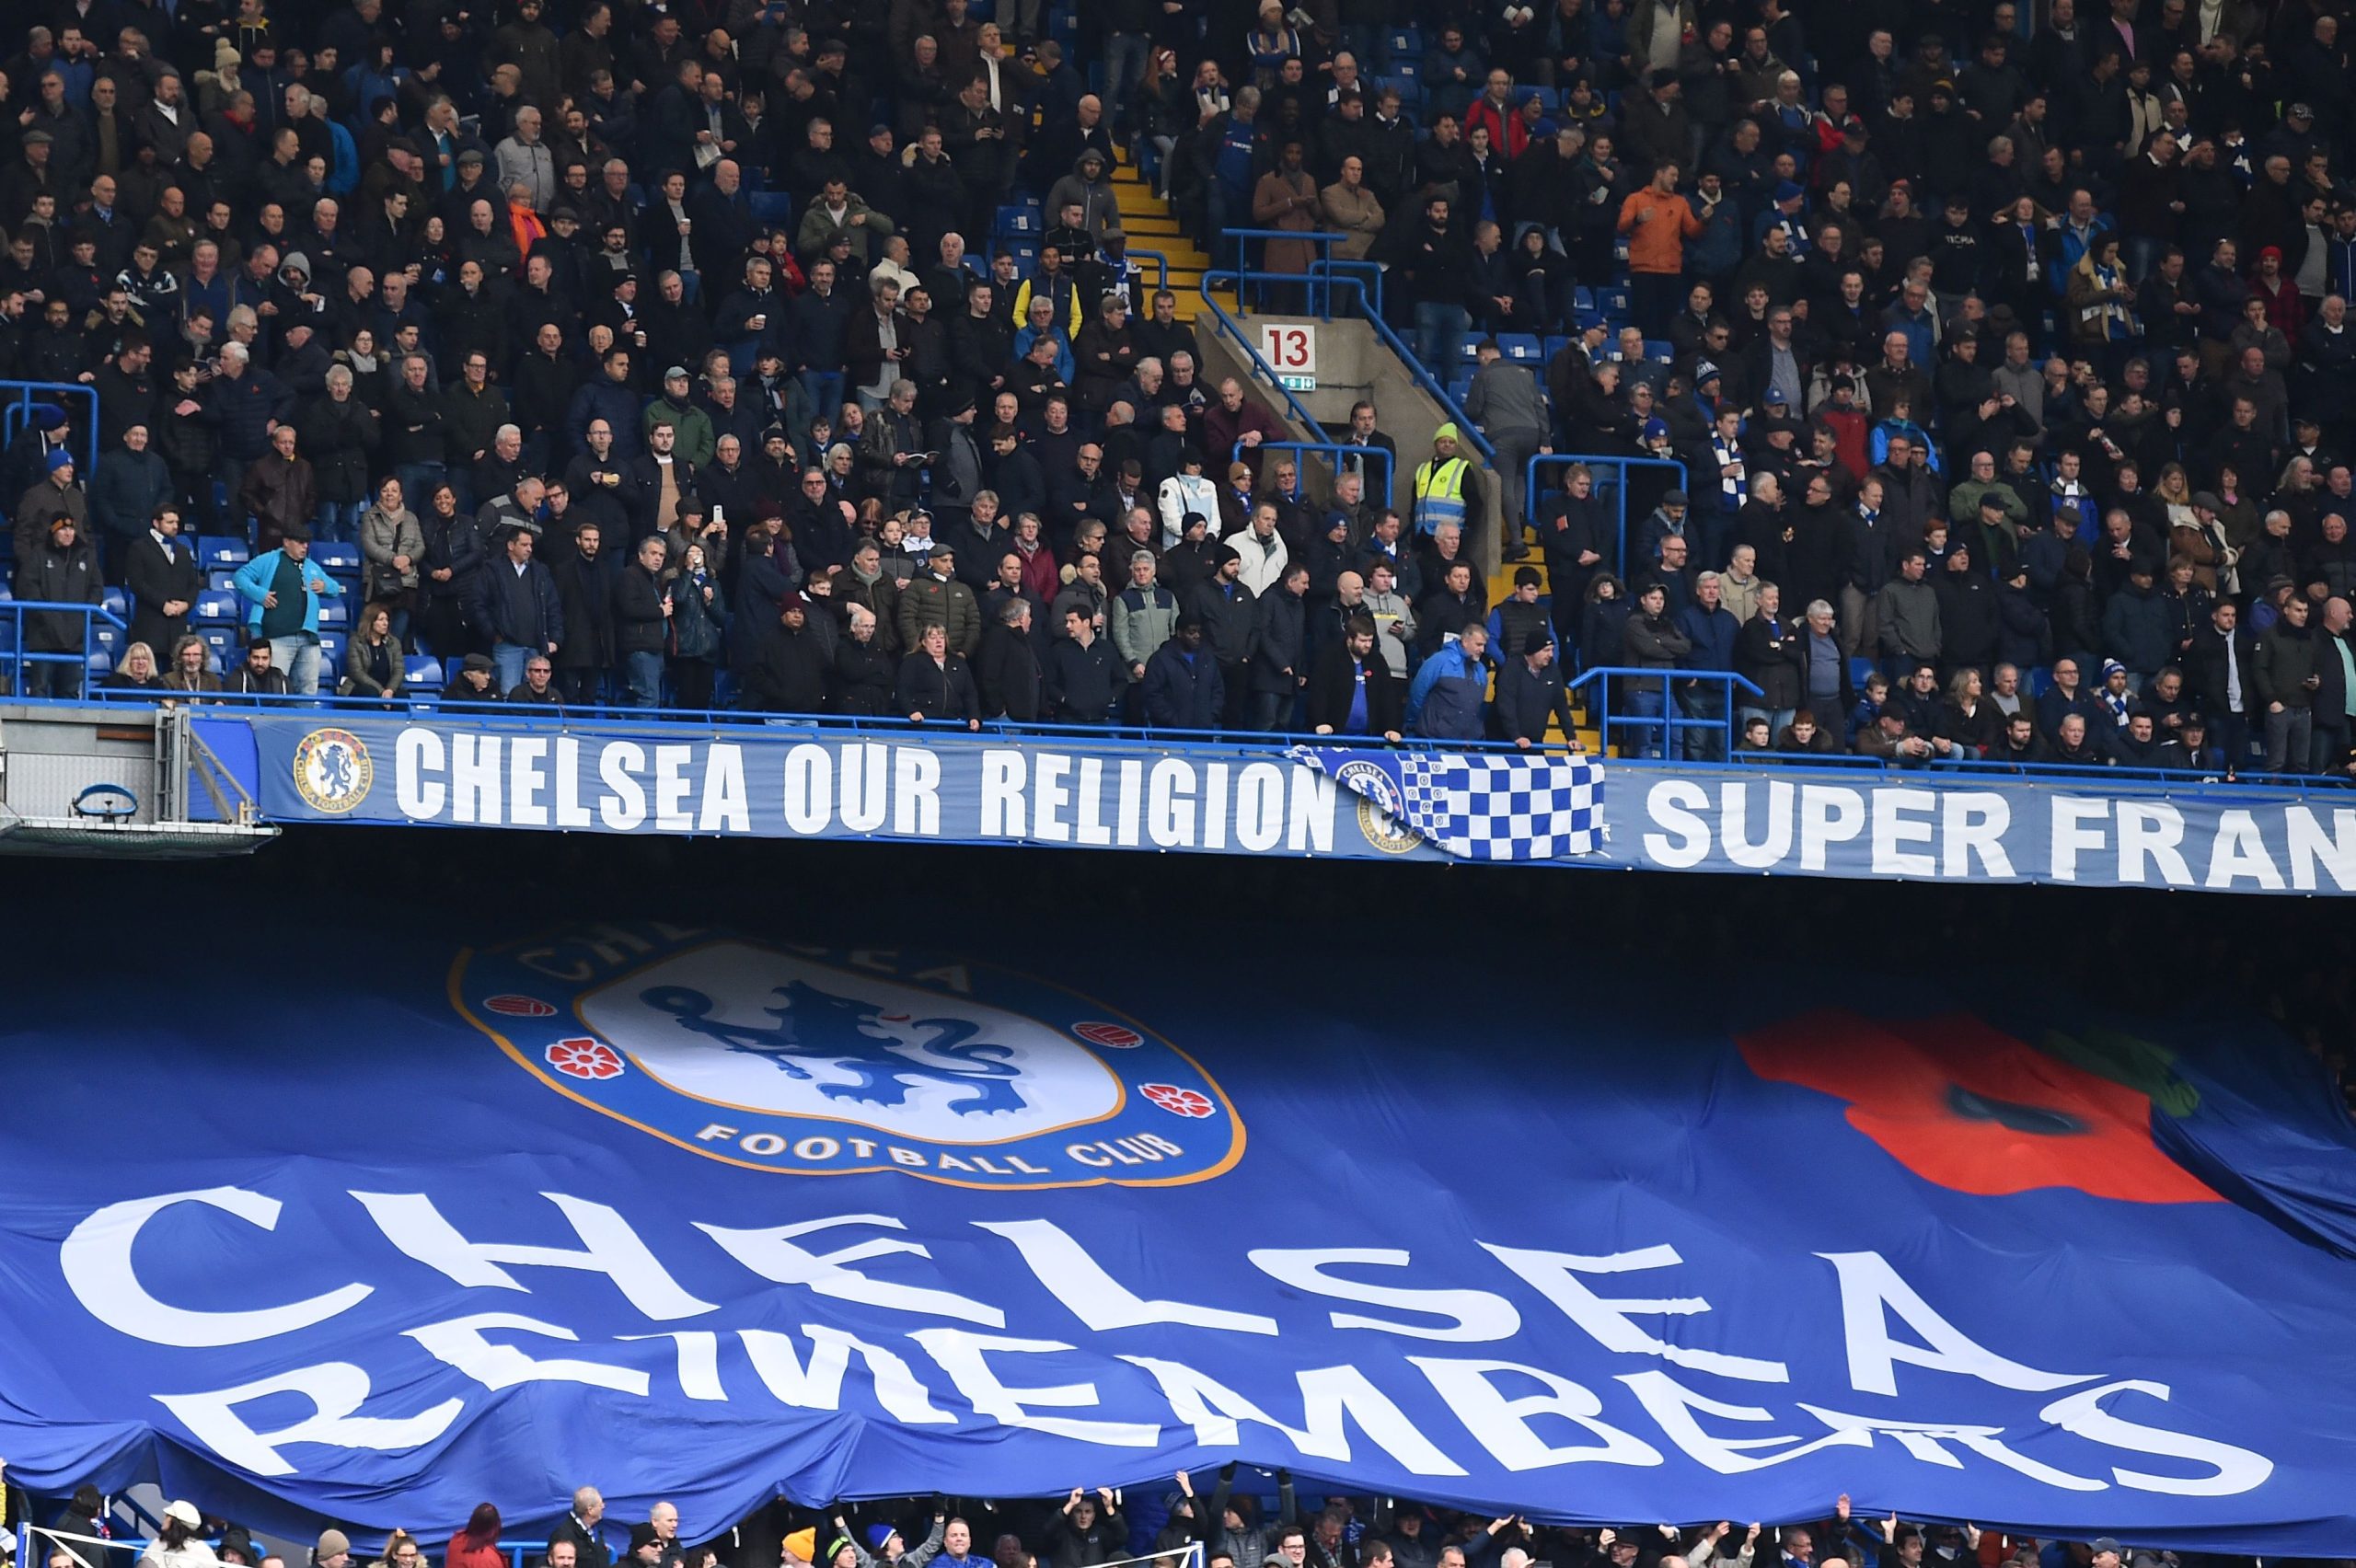 Chelsea fans at Stamford Bridge during a match against Crystal Palace.